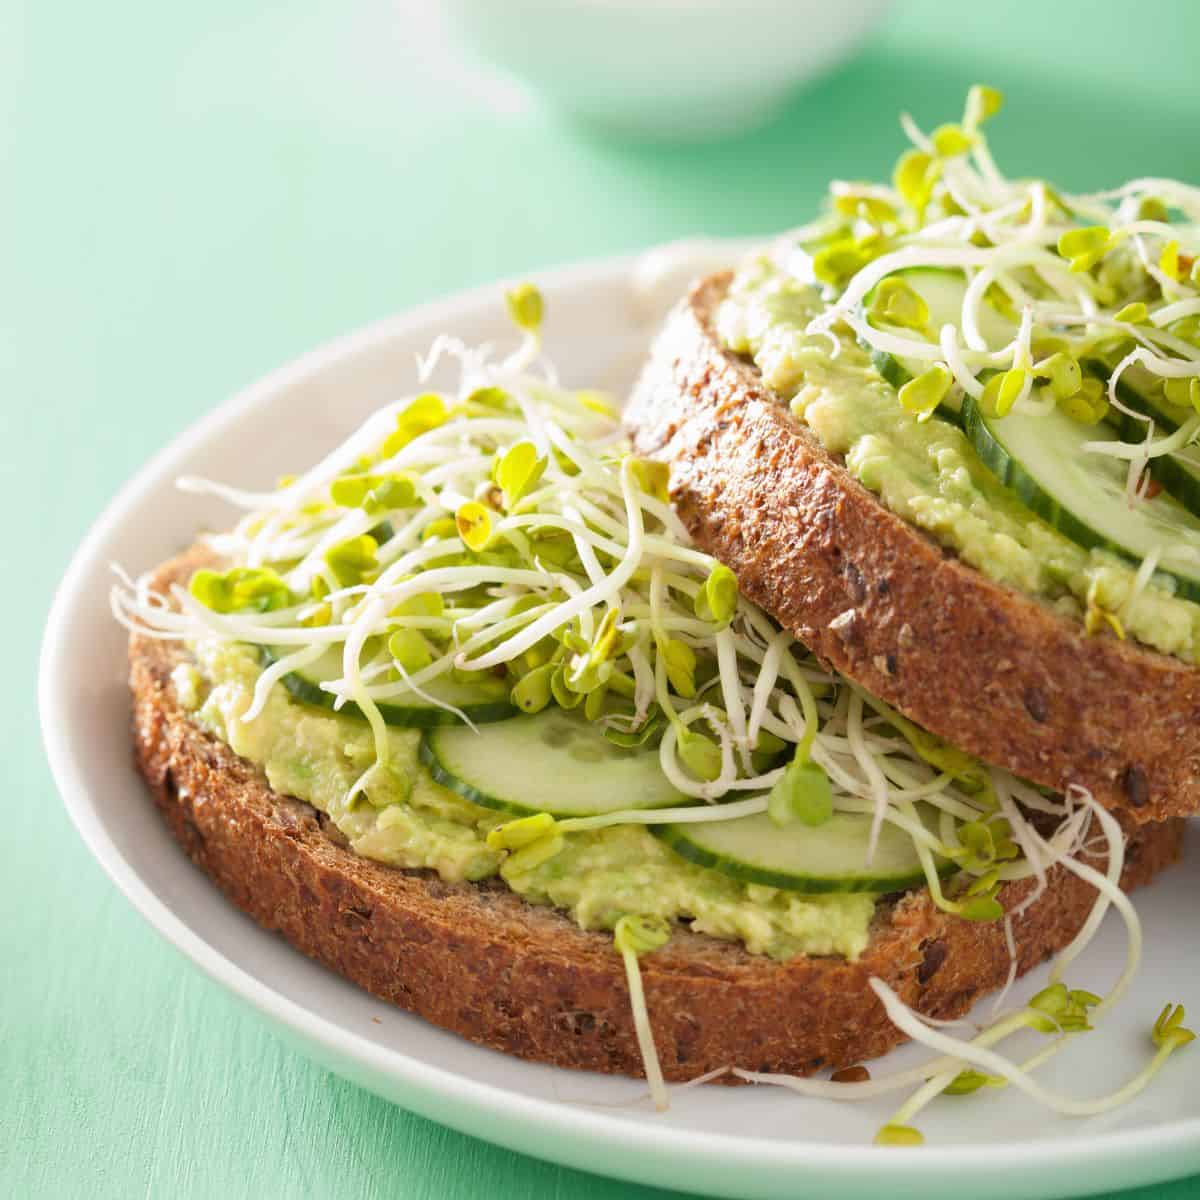 A plate of toasted bread with sprouts on it. Learn how to cook sprouted beans.